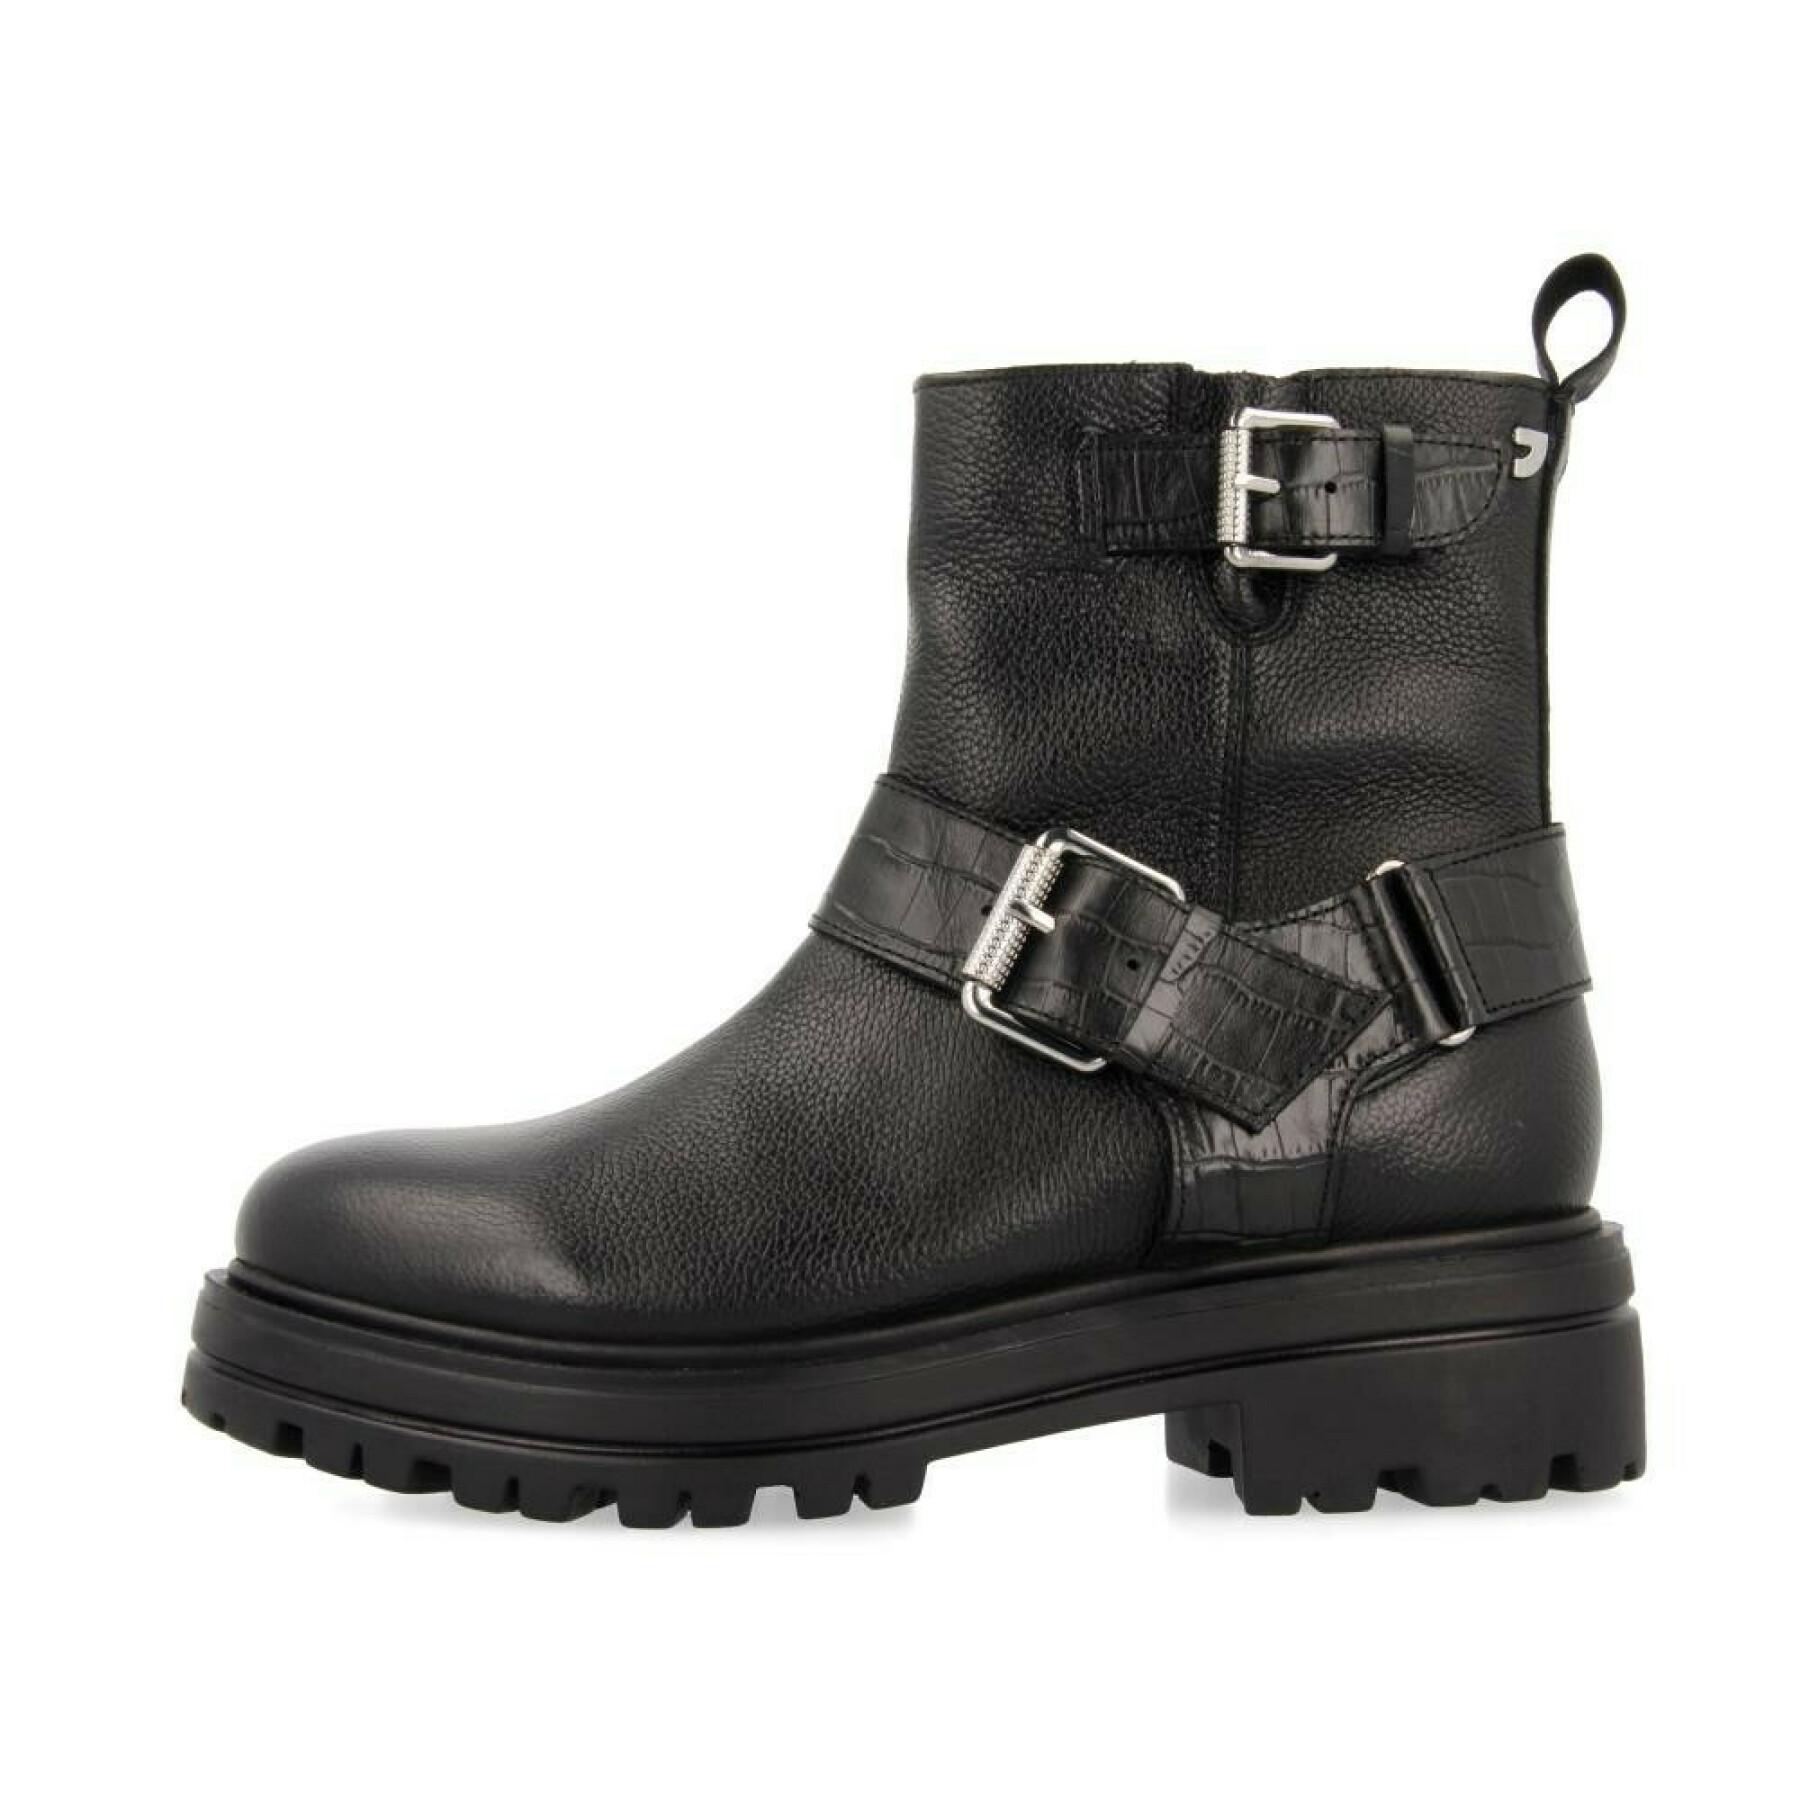 Women's boots Gioseppo Enschede